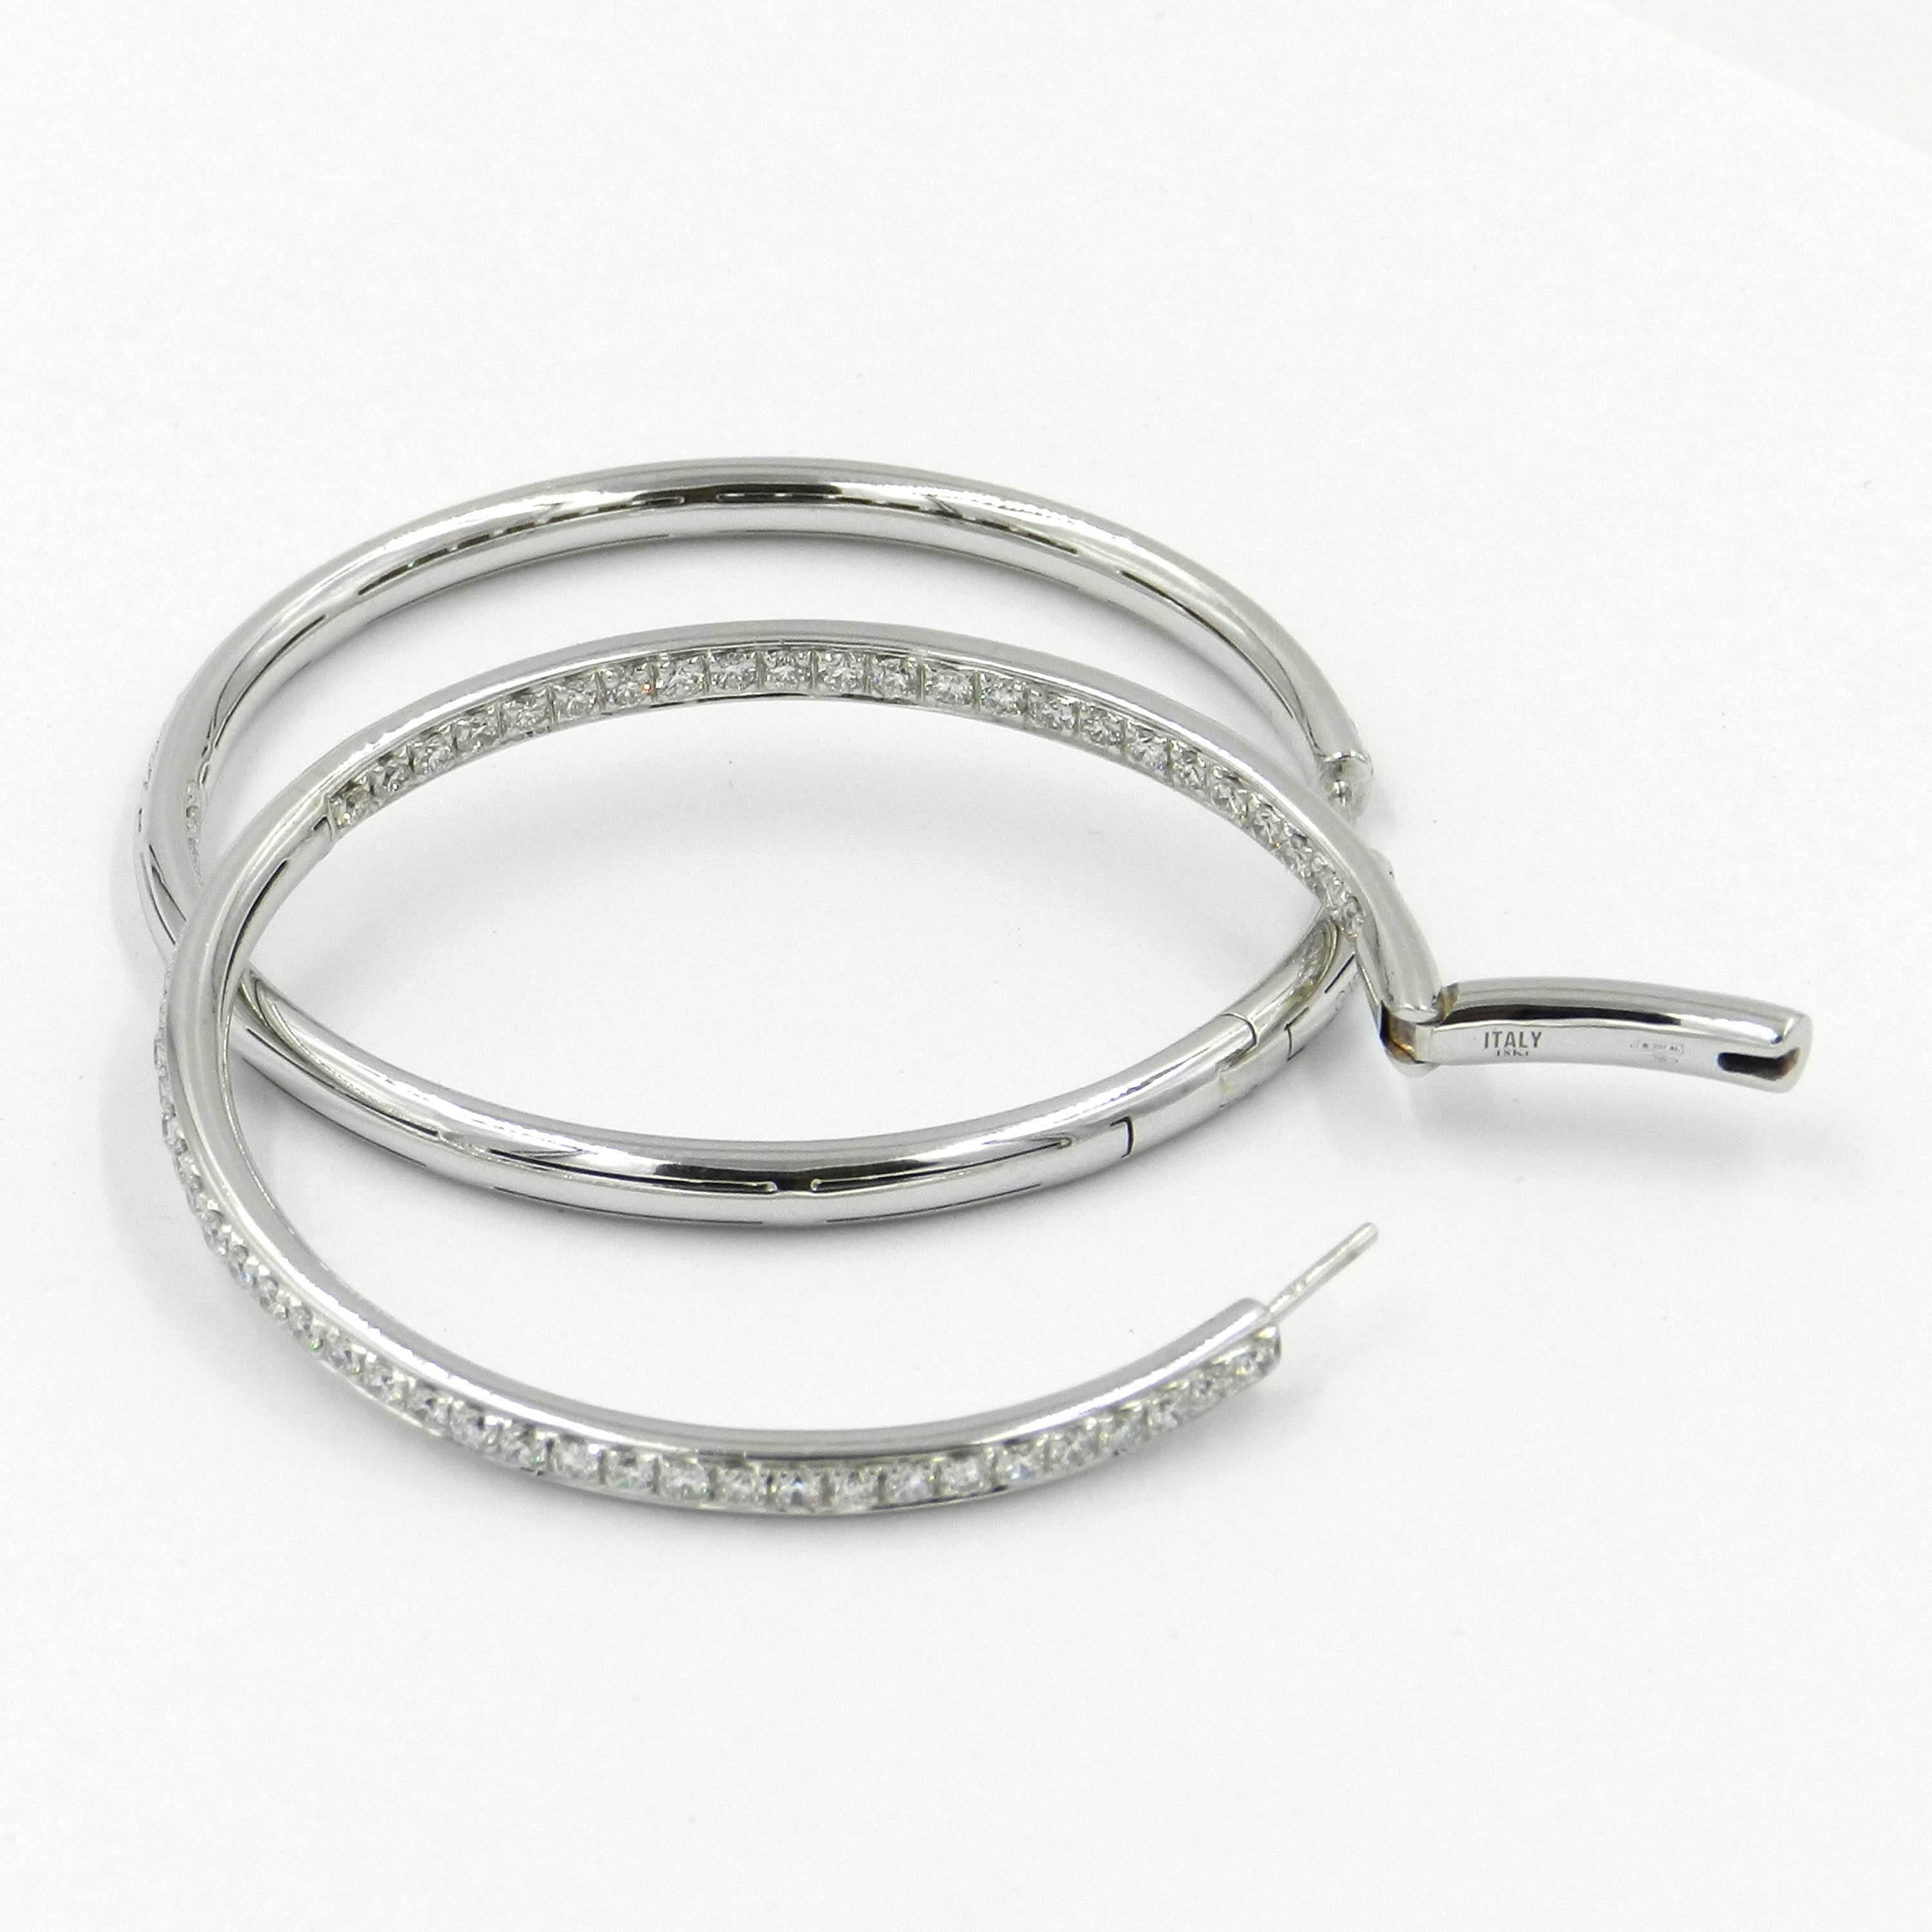 18KT White Gold White Diamonds Garavelli Round Hoops EARRINGS with diamonds in the front outside and in the front inside,
diameter mm 50
18kt GOLD gr : 22,90
WHITE DIAMONDS total ct : 4,05